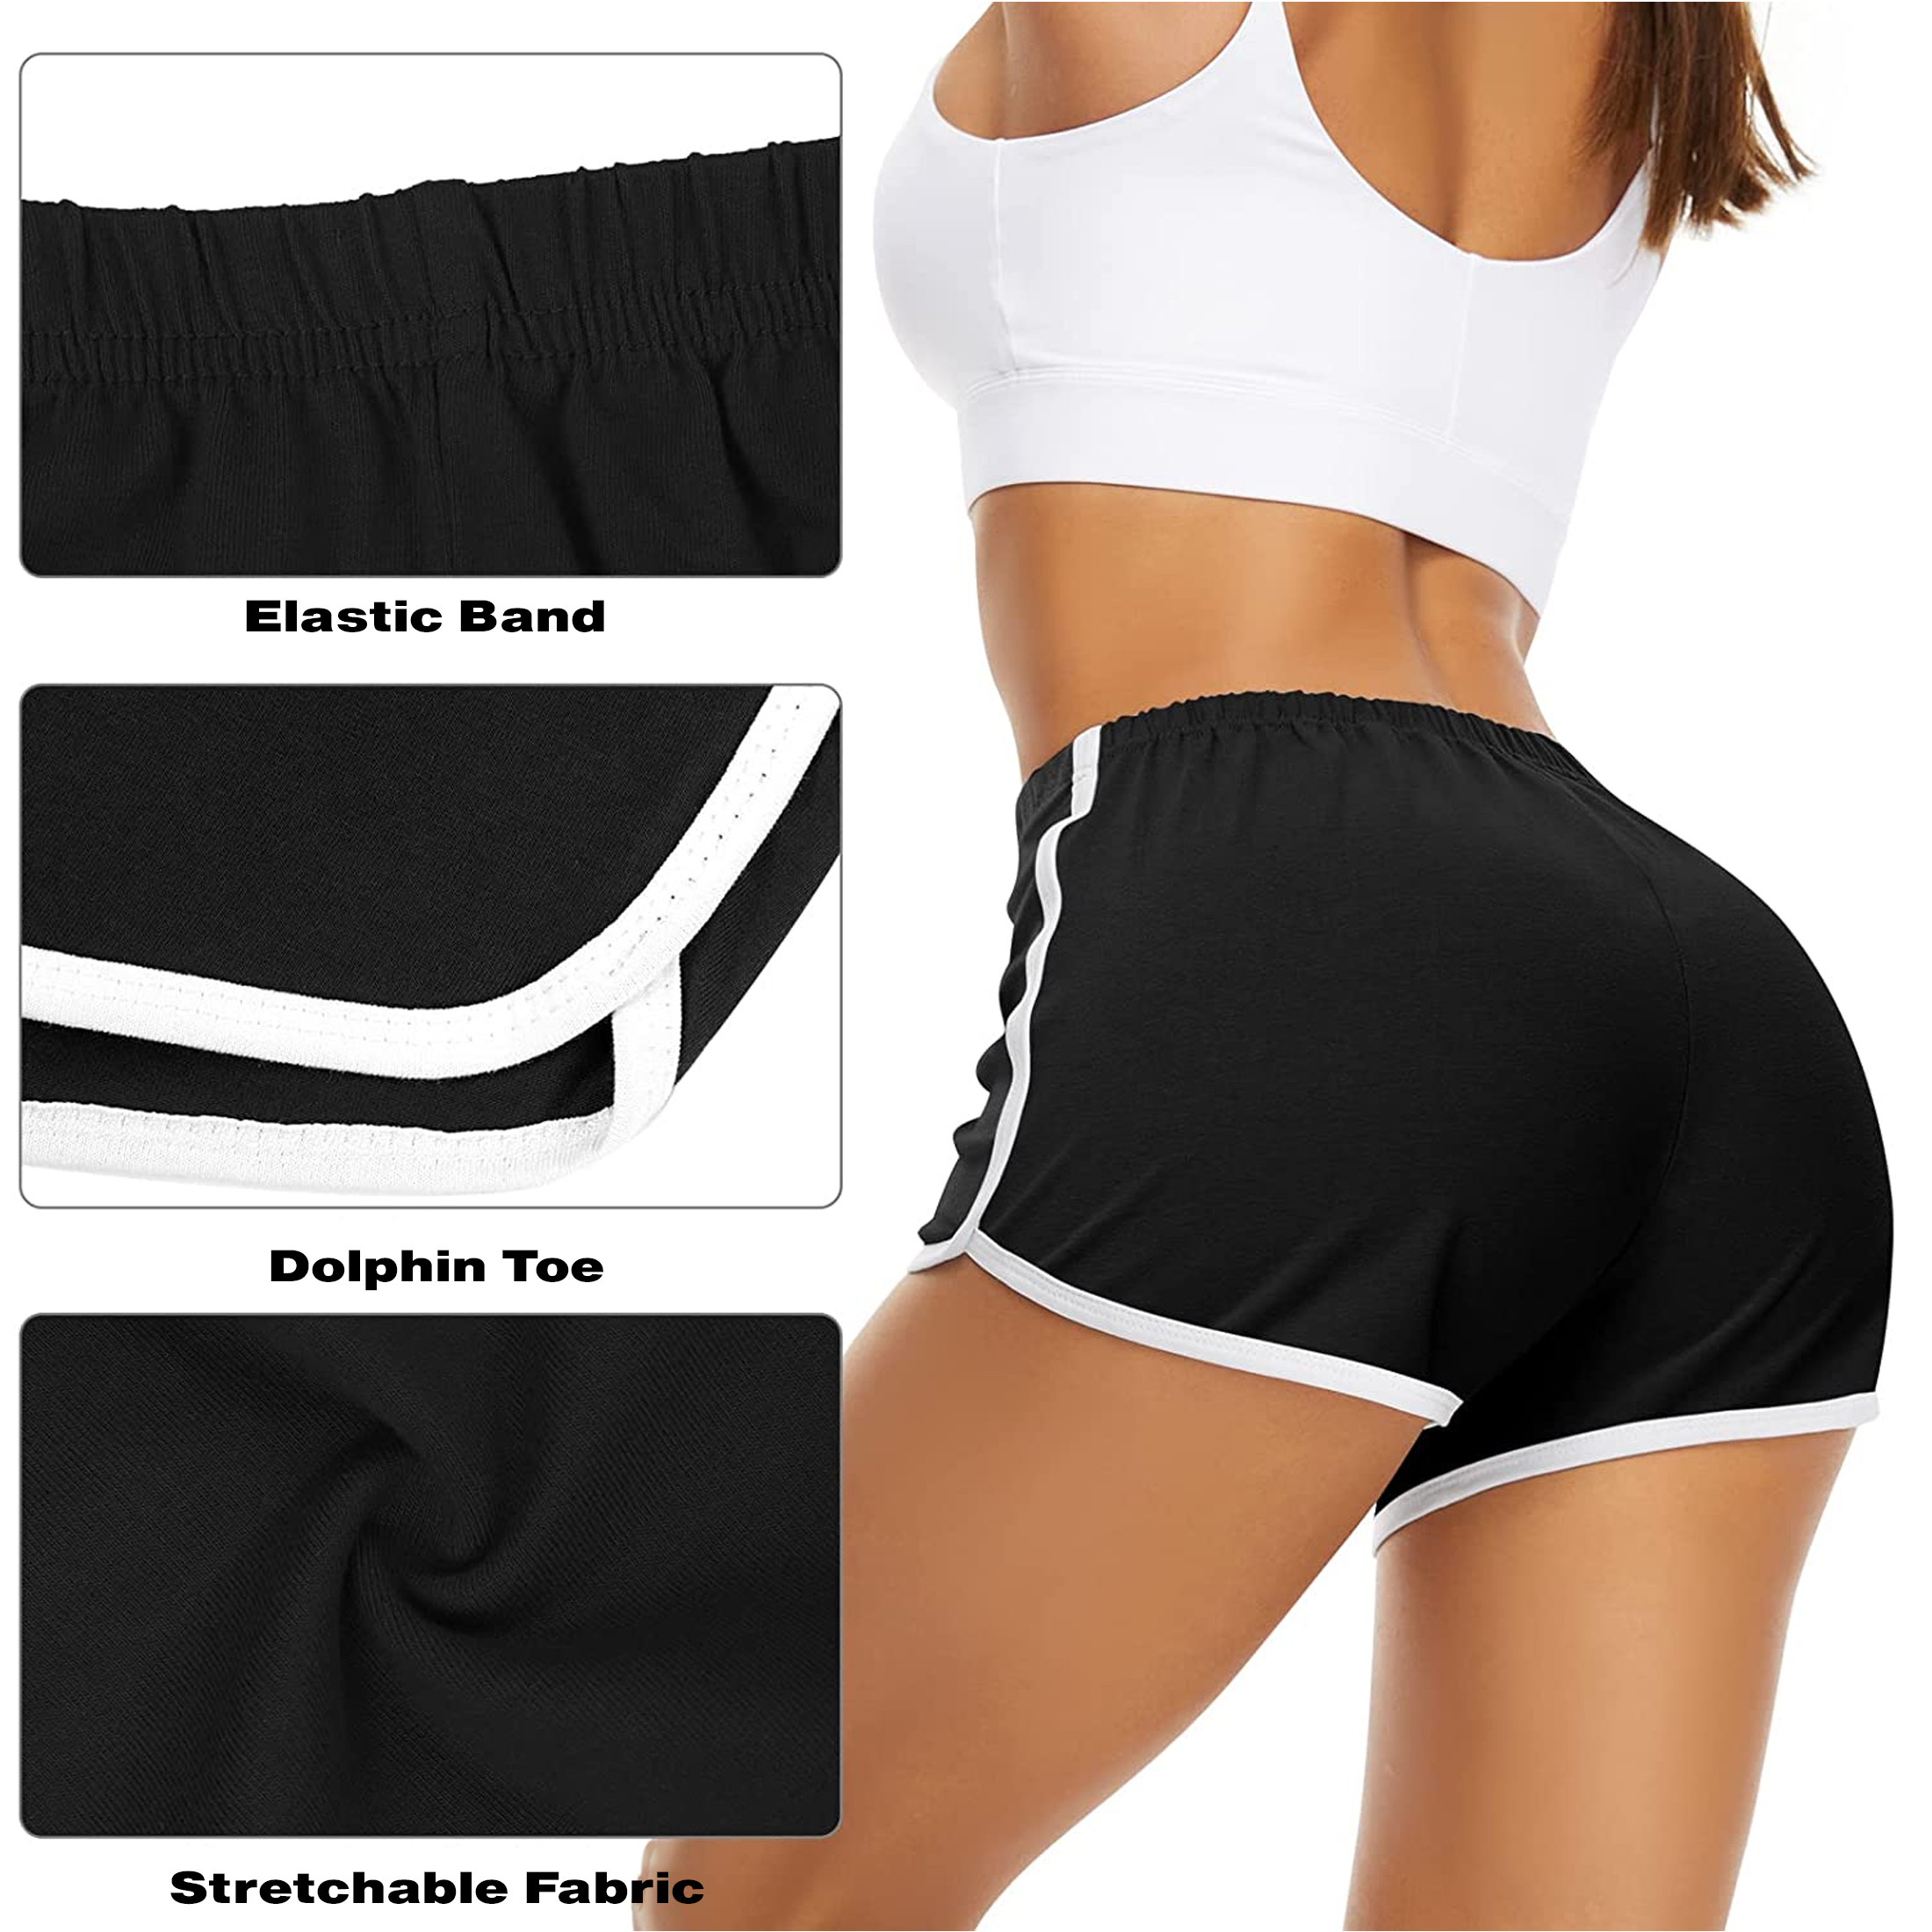 6-Pack: Women's Striped Dolphin Toe Soft Stylish Active Biker Gym Yoga Summer Shorts - Small